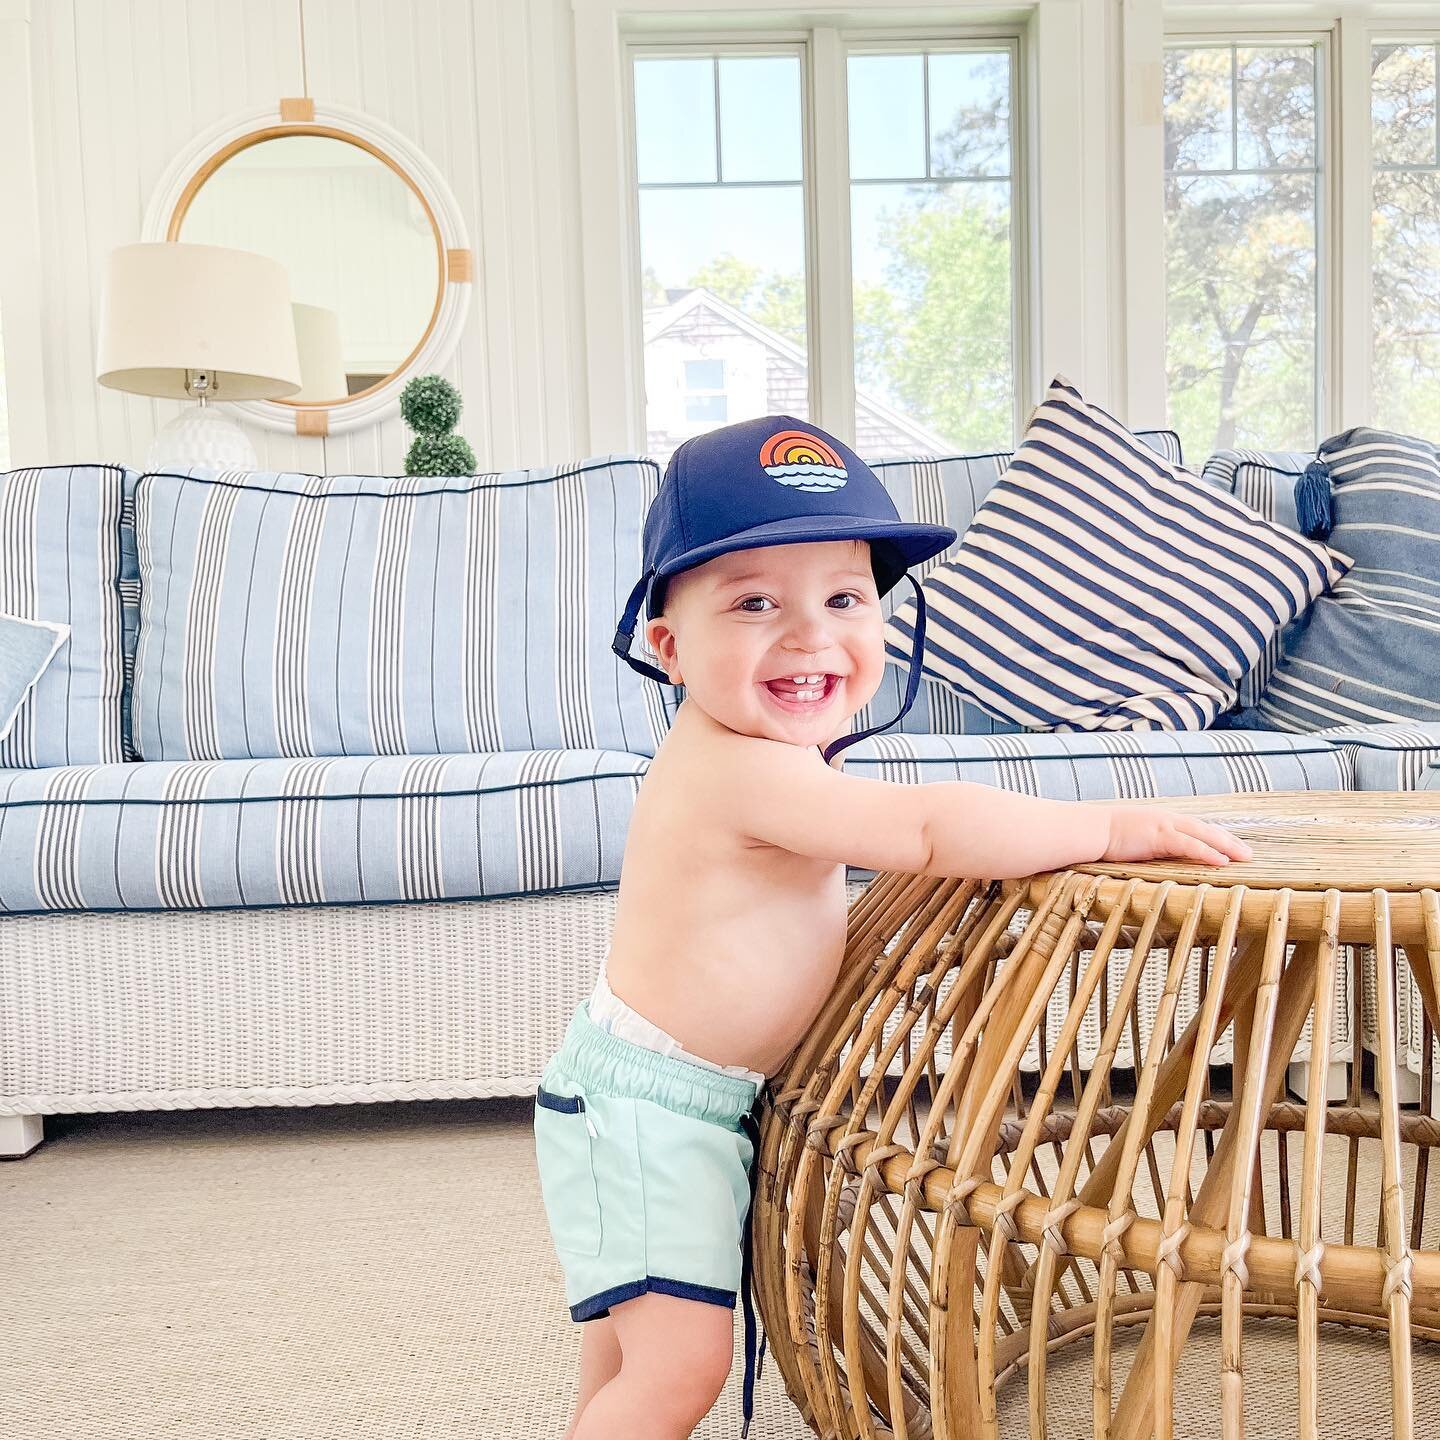 Look at this little guy. He&rsquo;s ready for summer. No relaxing beach days for this momma 🤣

.
.
#littlefierceones #momwithacamera #mommybloggers #mommylife #momitforward #childhoodunplugged #motherhoodunplugged #letthembelittle #mommyproblems #mo